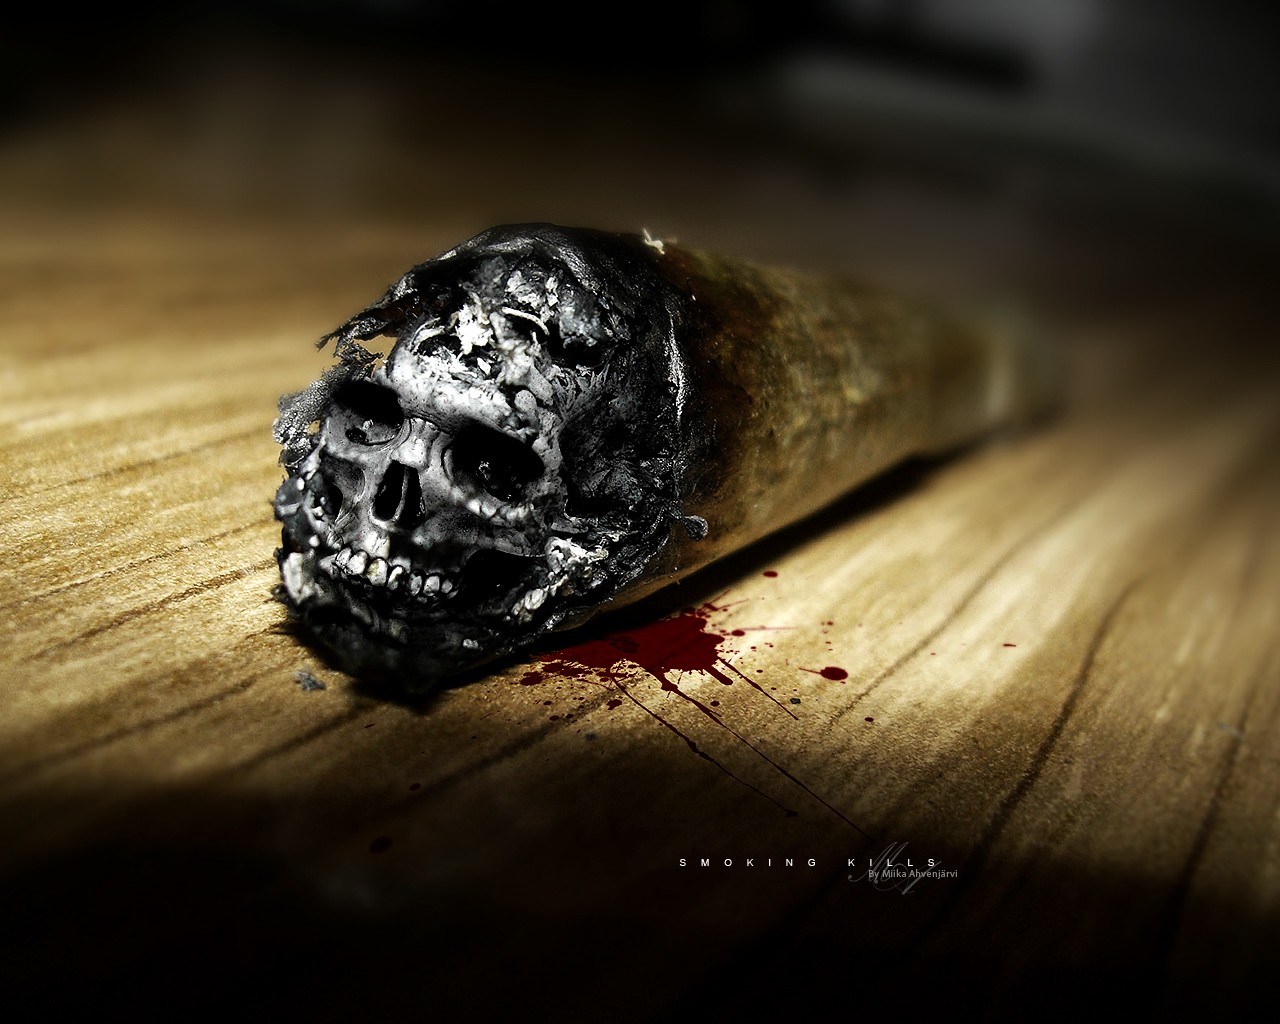 General 1280x1024 skull joint smoking drugs text typography